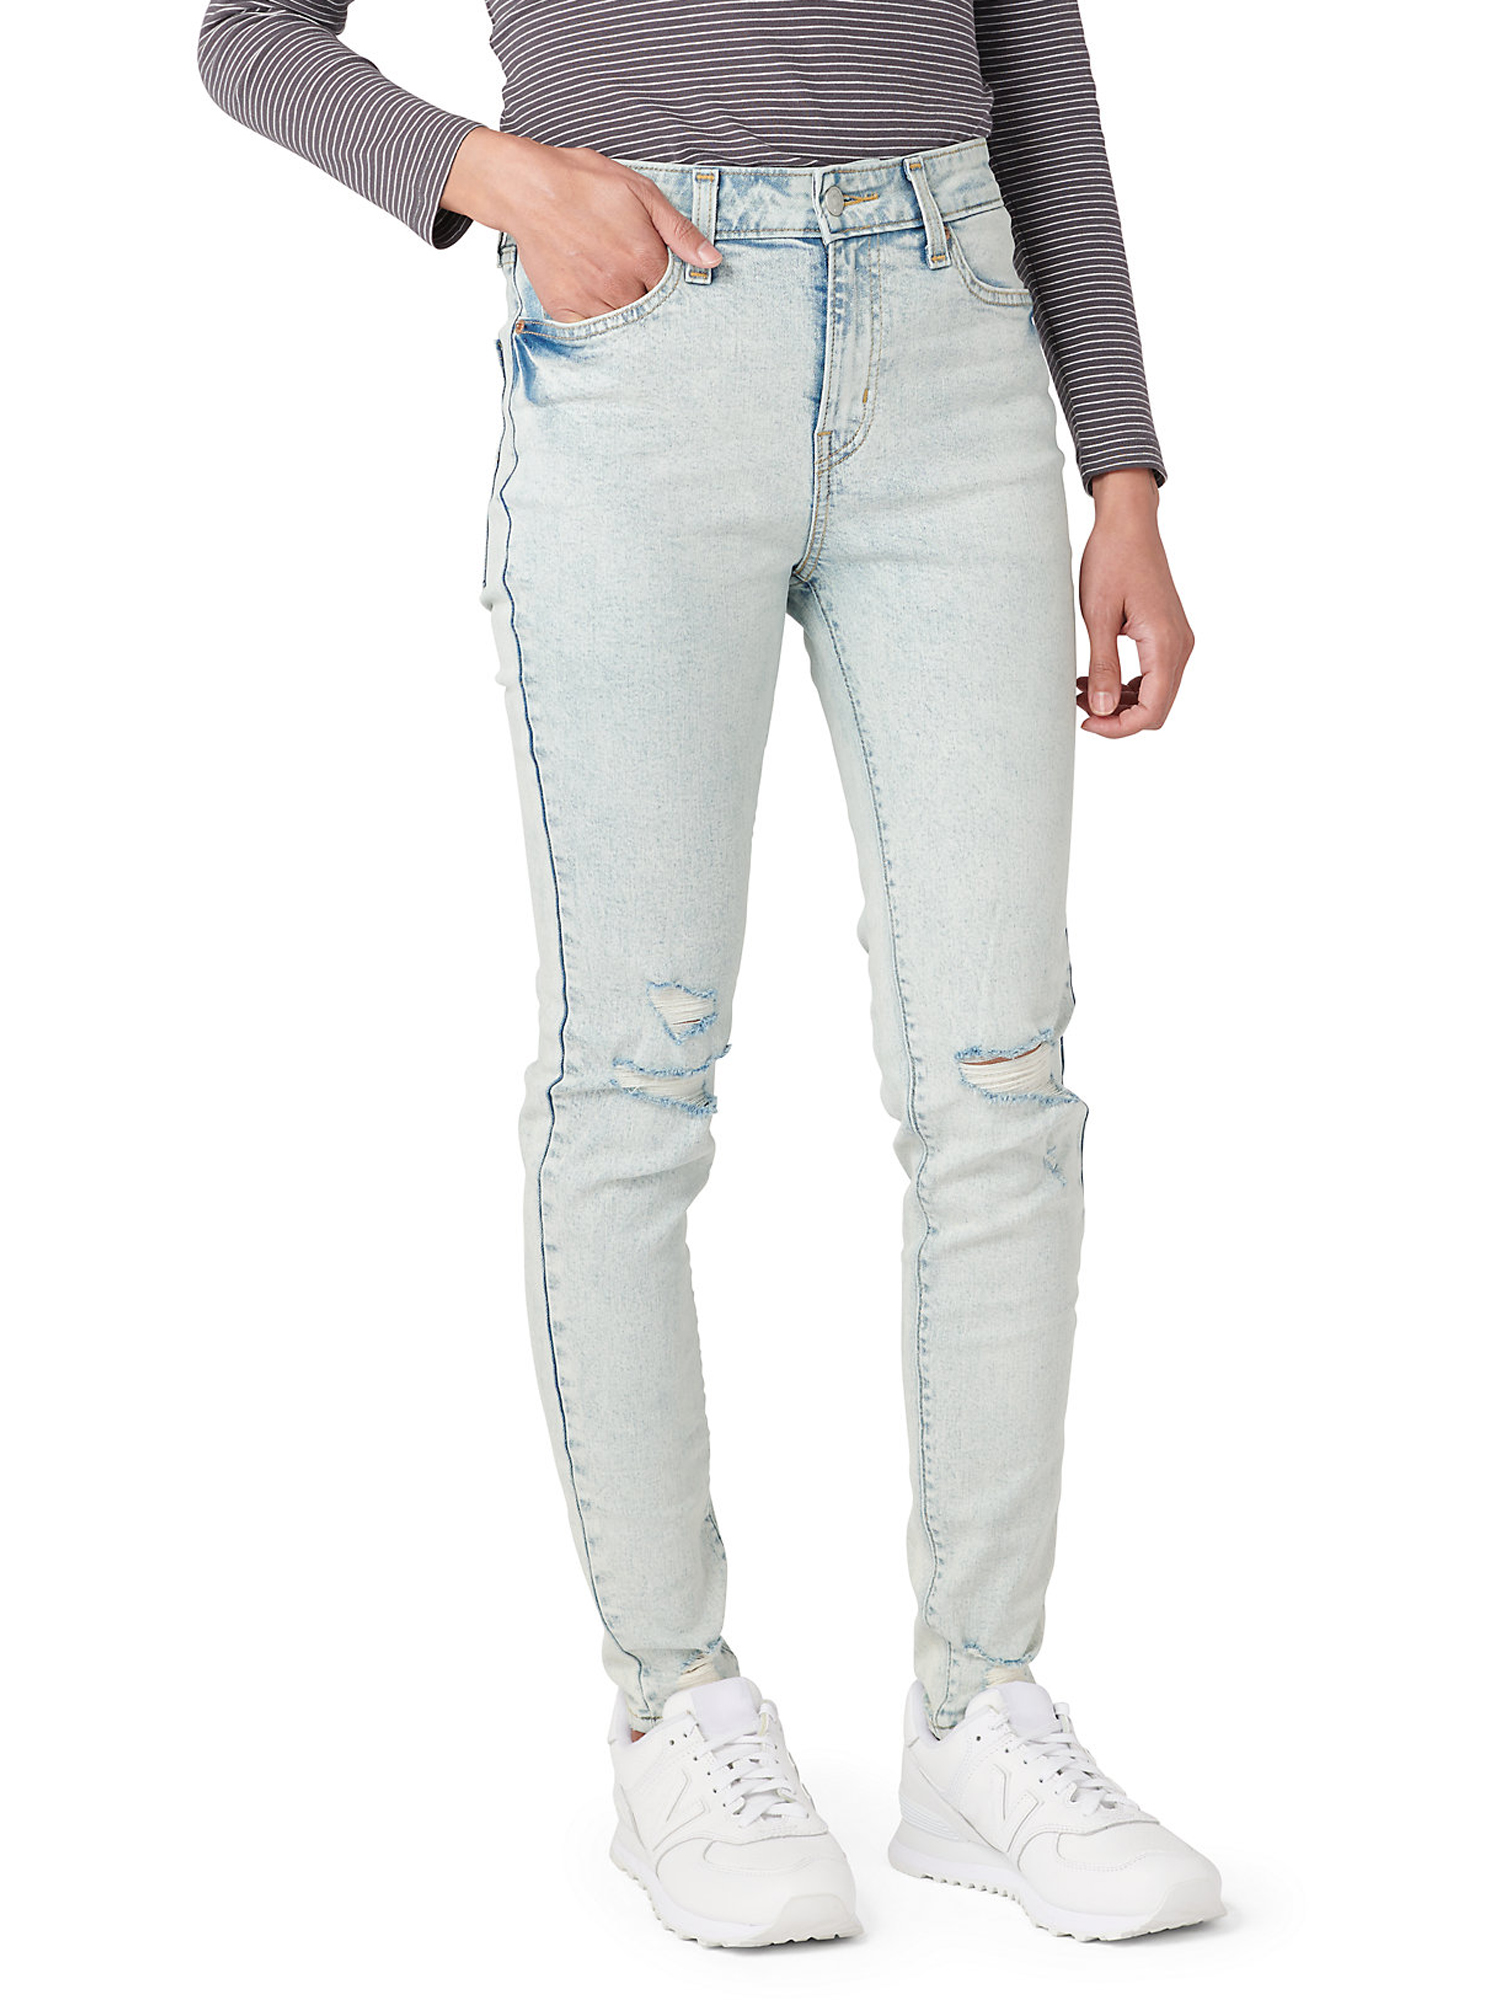 Signature by Levi Strauss & Co. Juniors' High Rise Jeggings - image 1 of 4